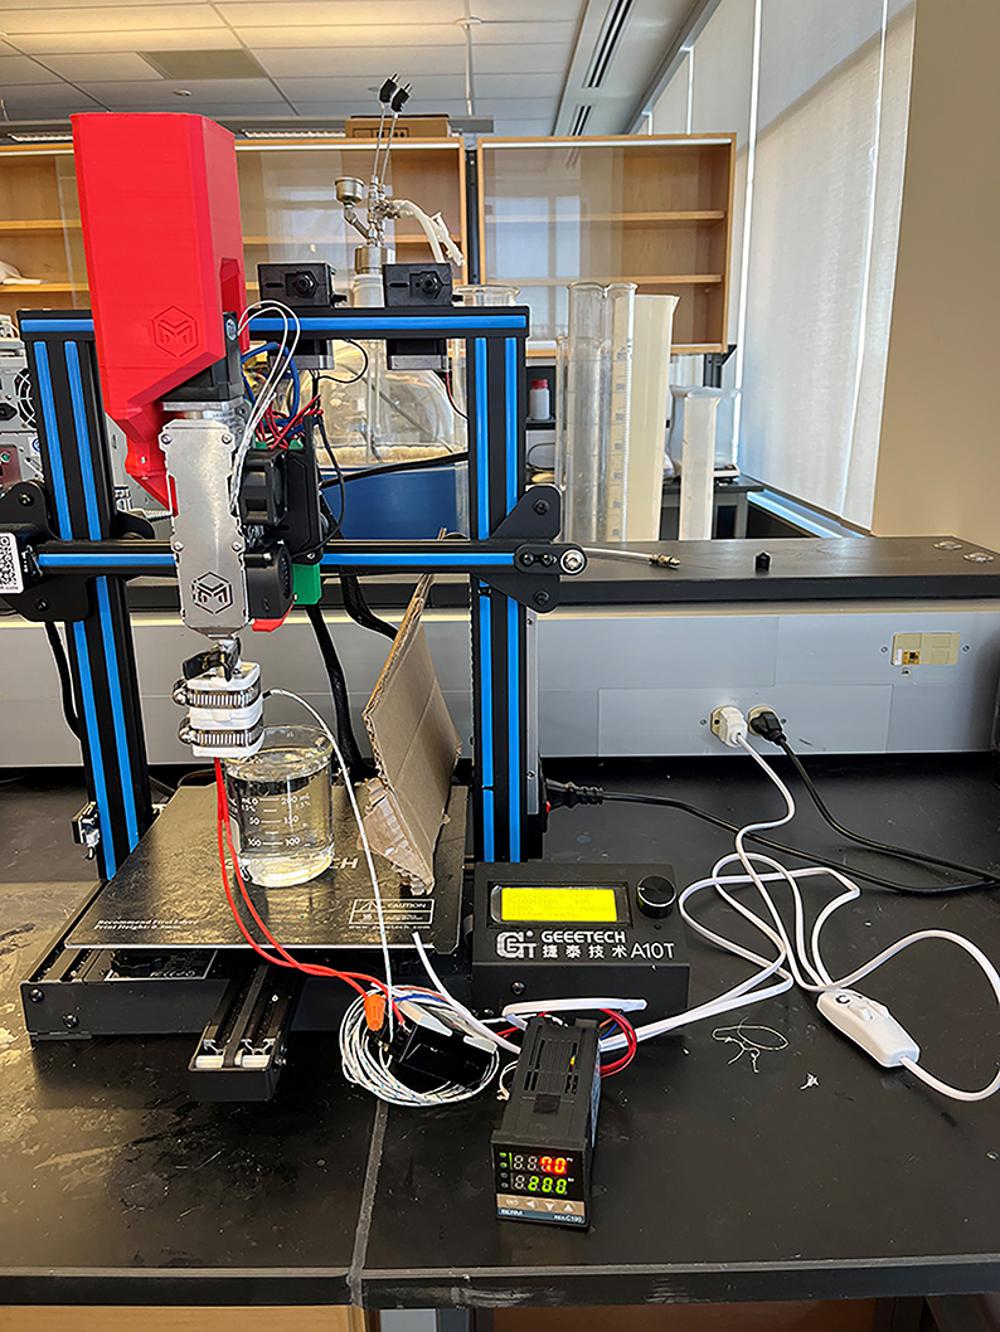 A 3D printer and equipment sits on a counter in a classroom